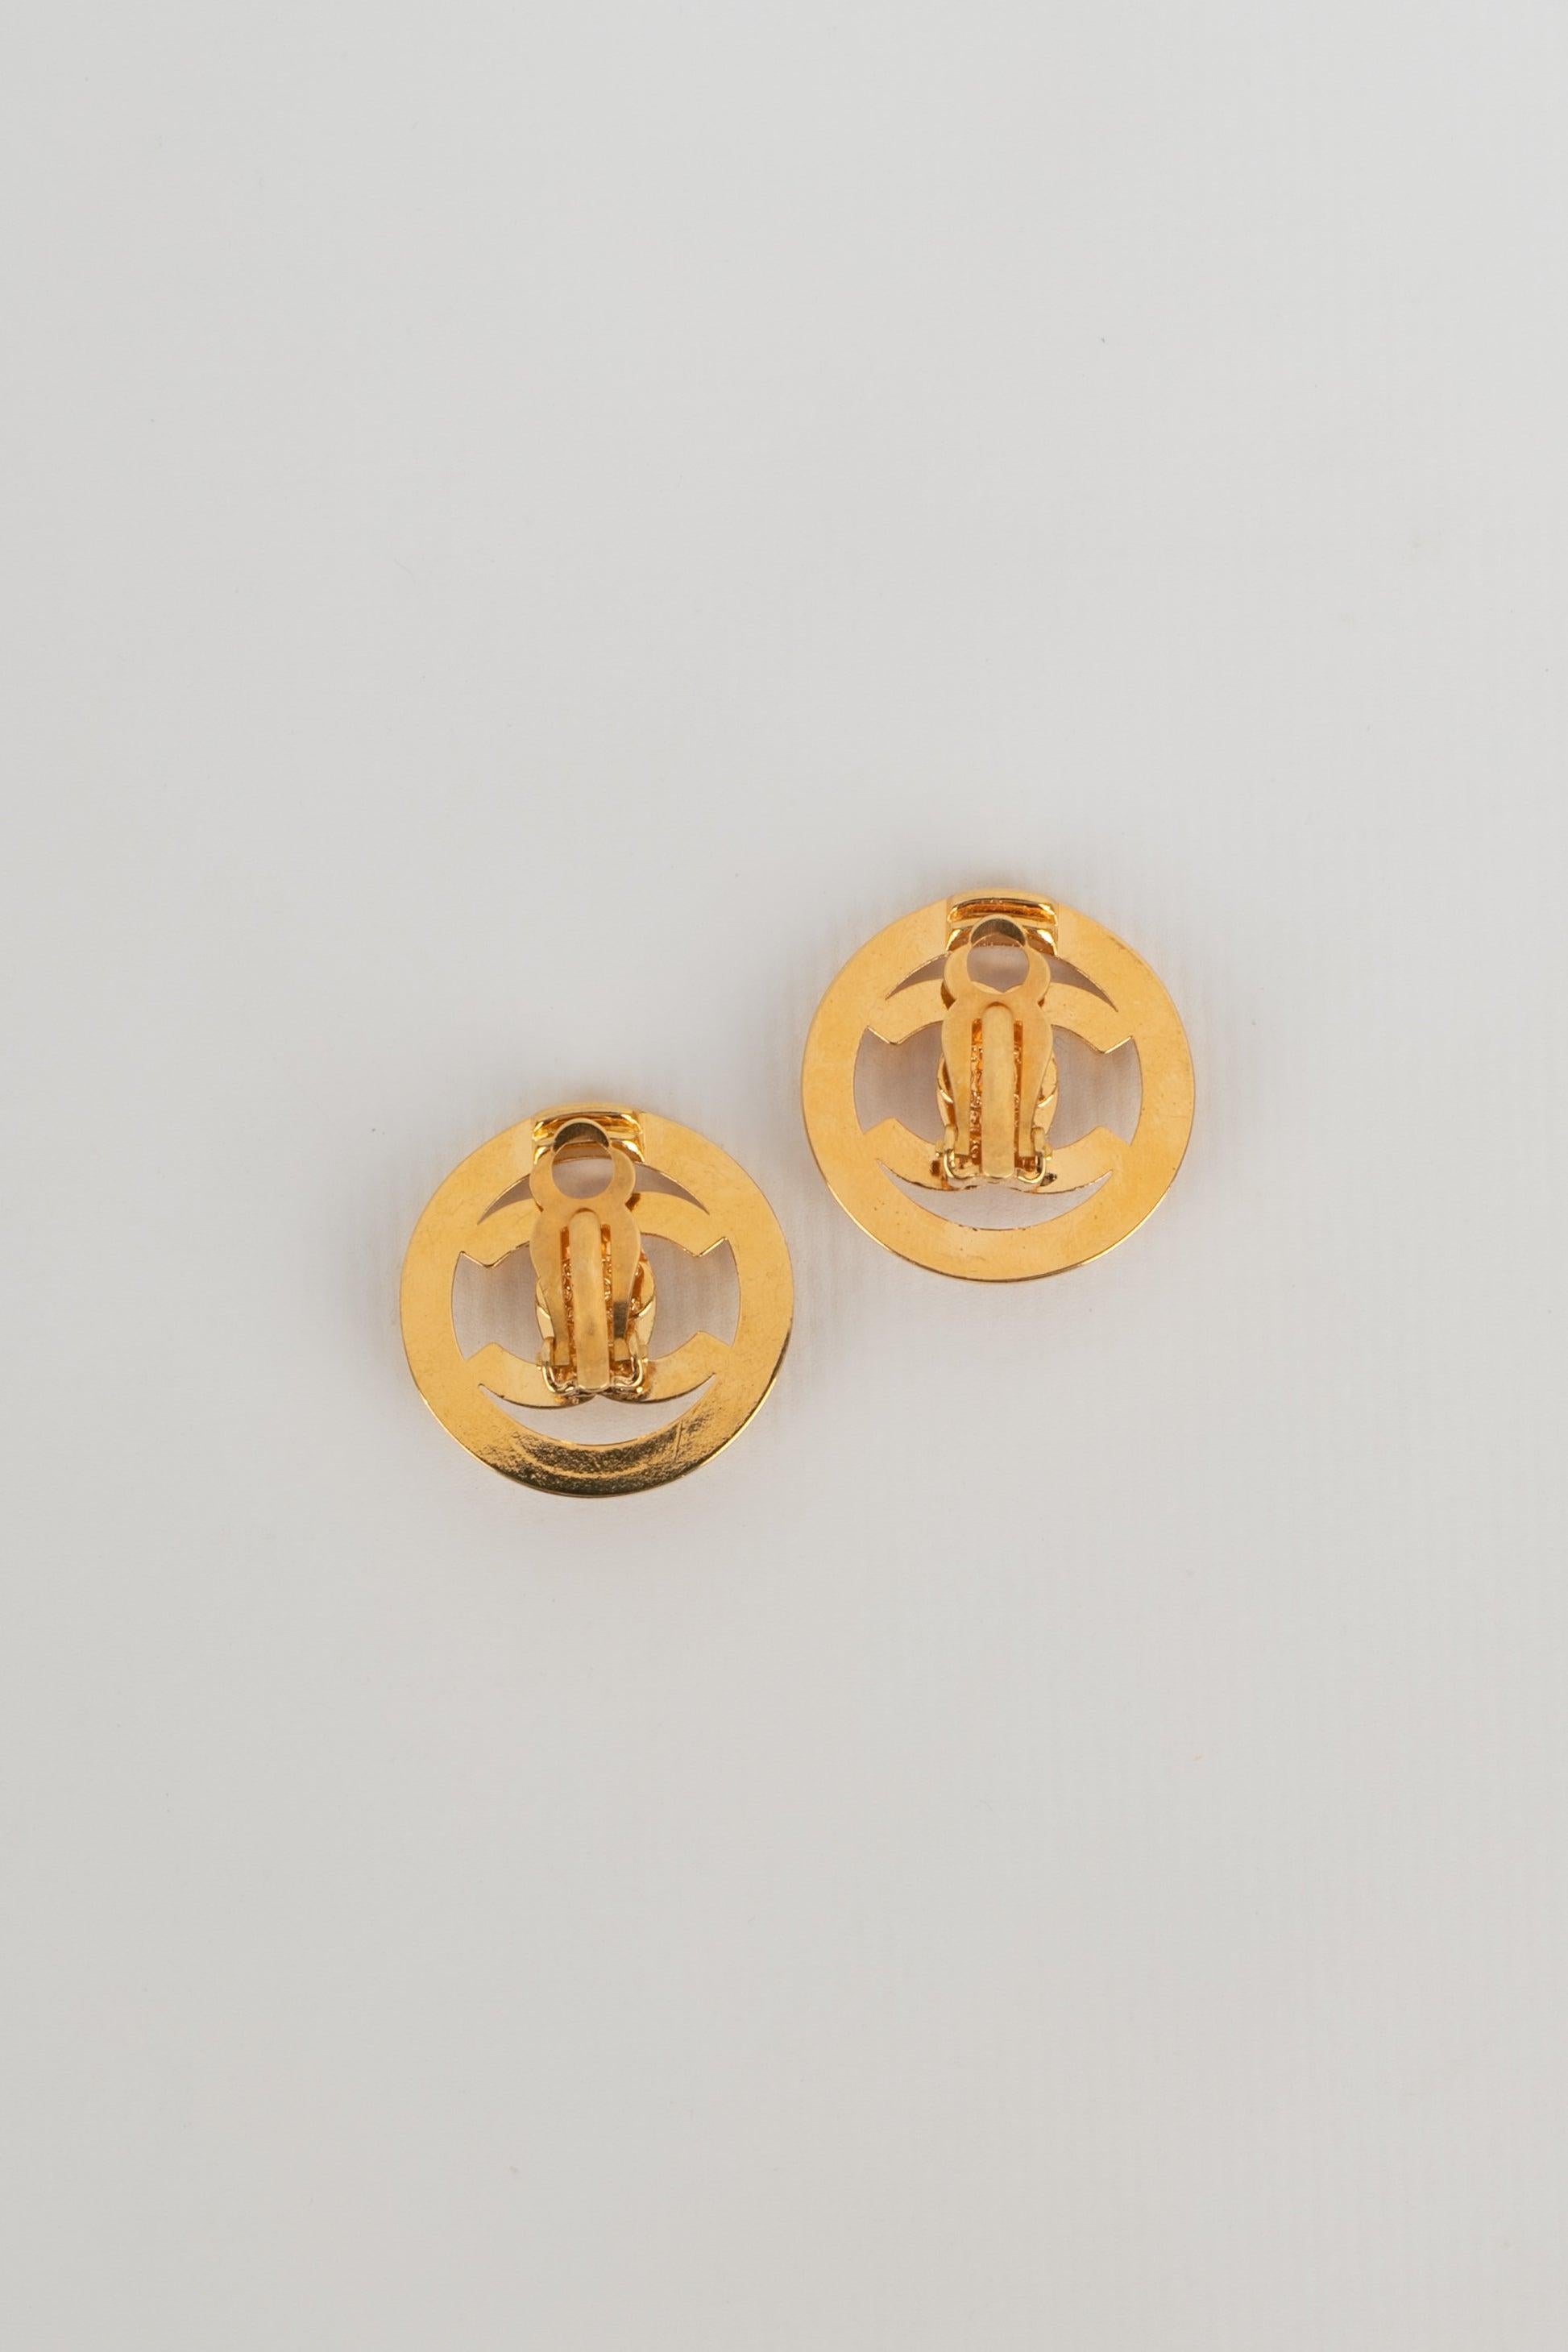 Chanel Golden Metal Turn-lock Earrings, 1997 In Excellent Condition For Sale In SAINT-OUEN-SUR-SEINE, FR